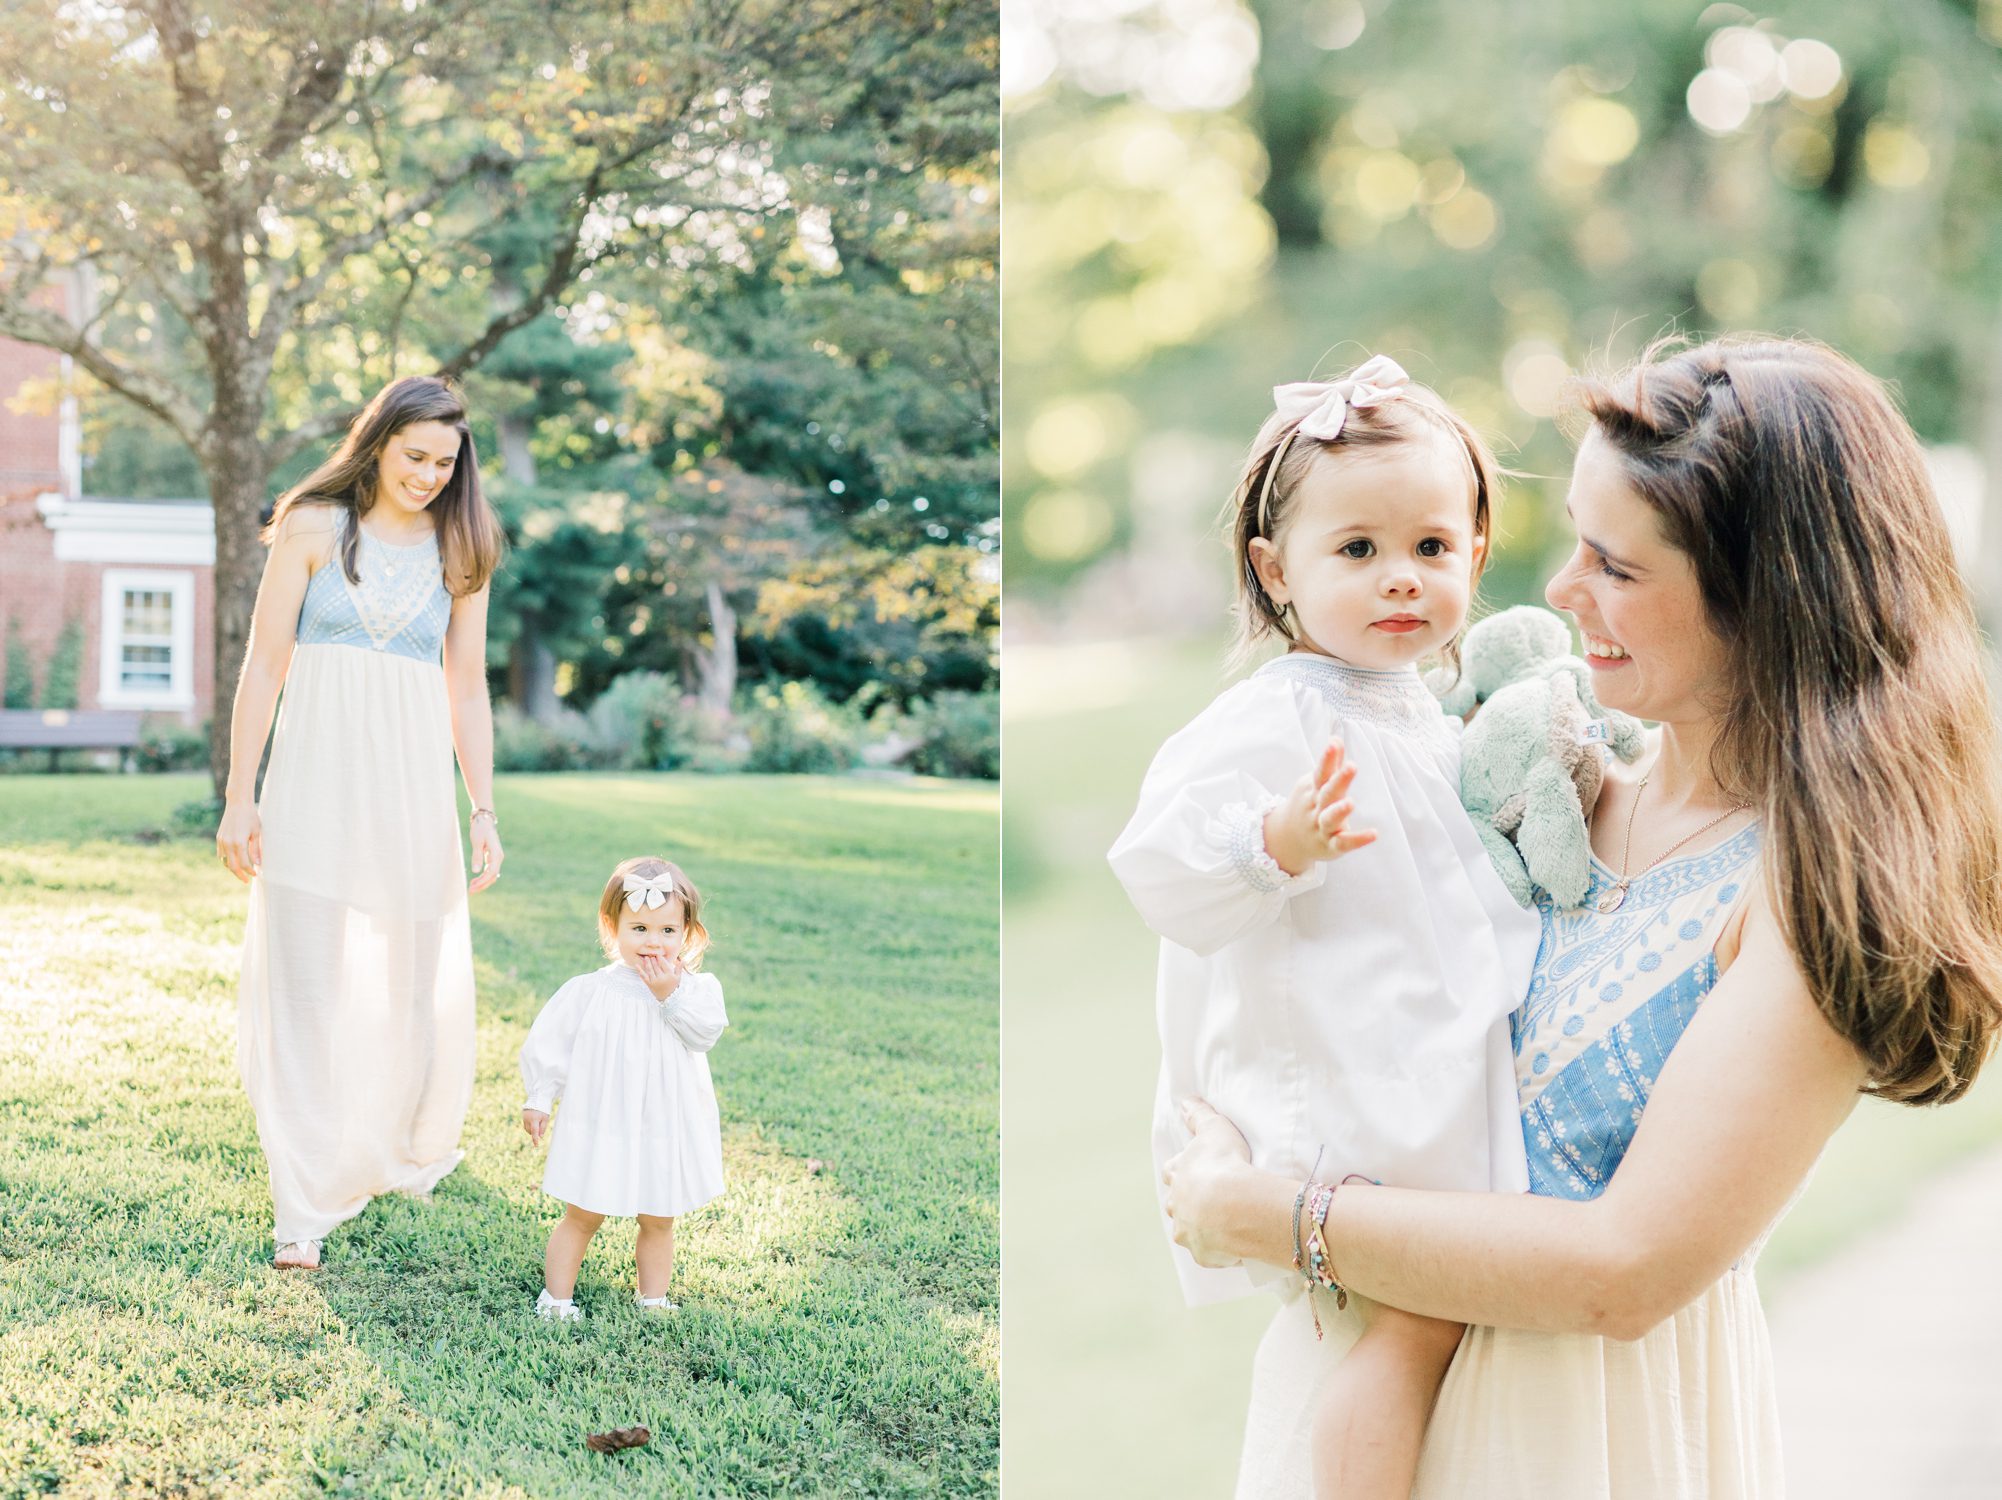 Portraits of Mom and daughter during family session in Chevy Chase, MD. Photo by LRG Portraits.